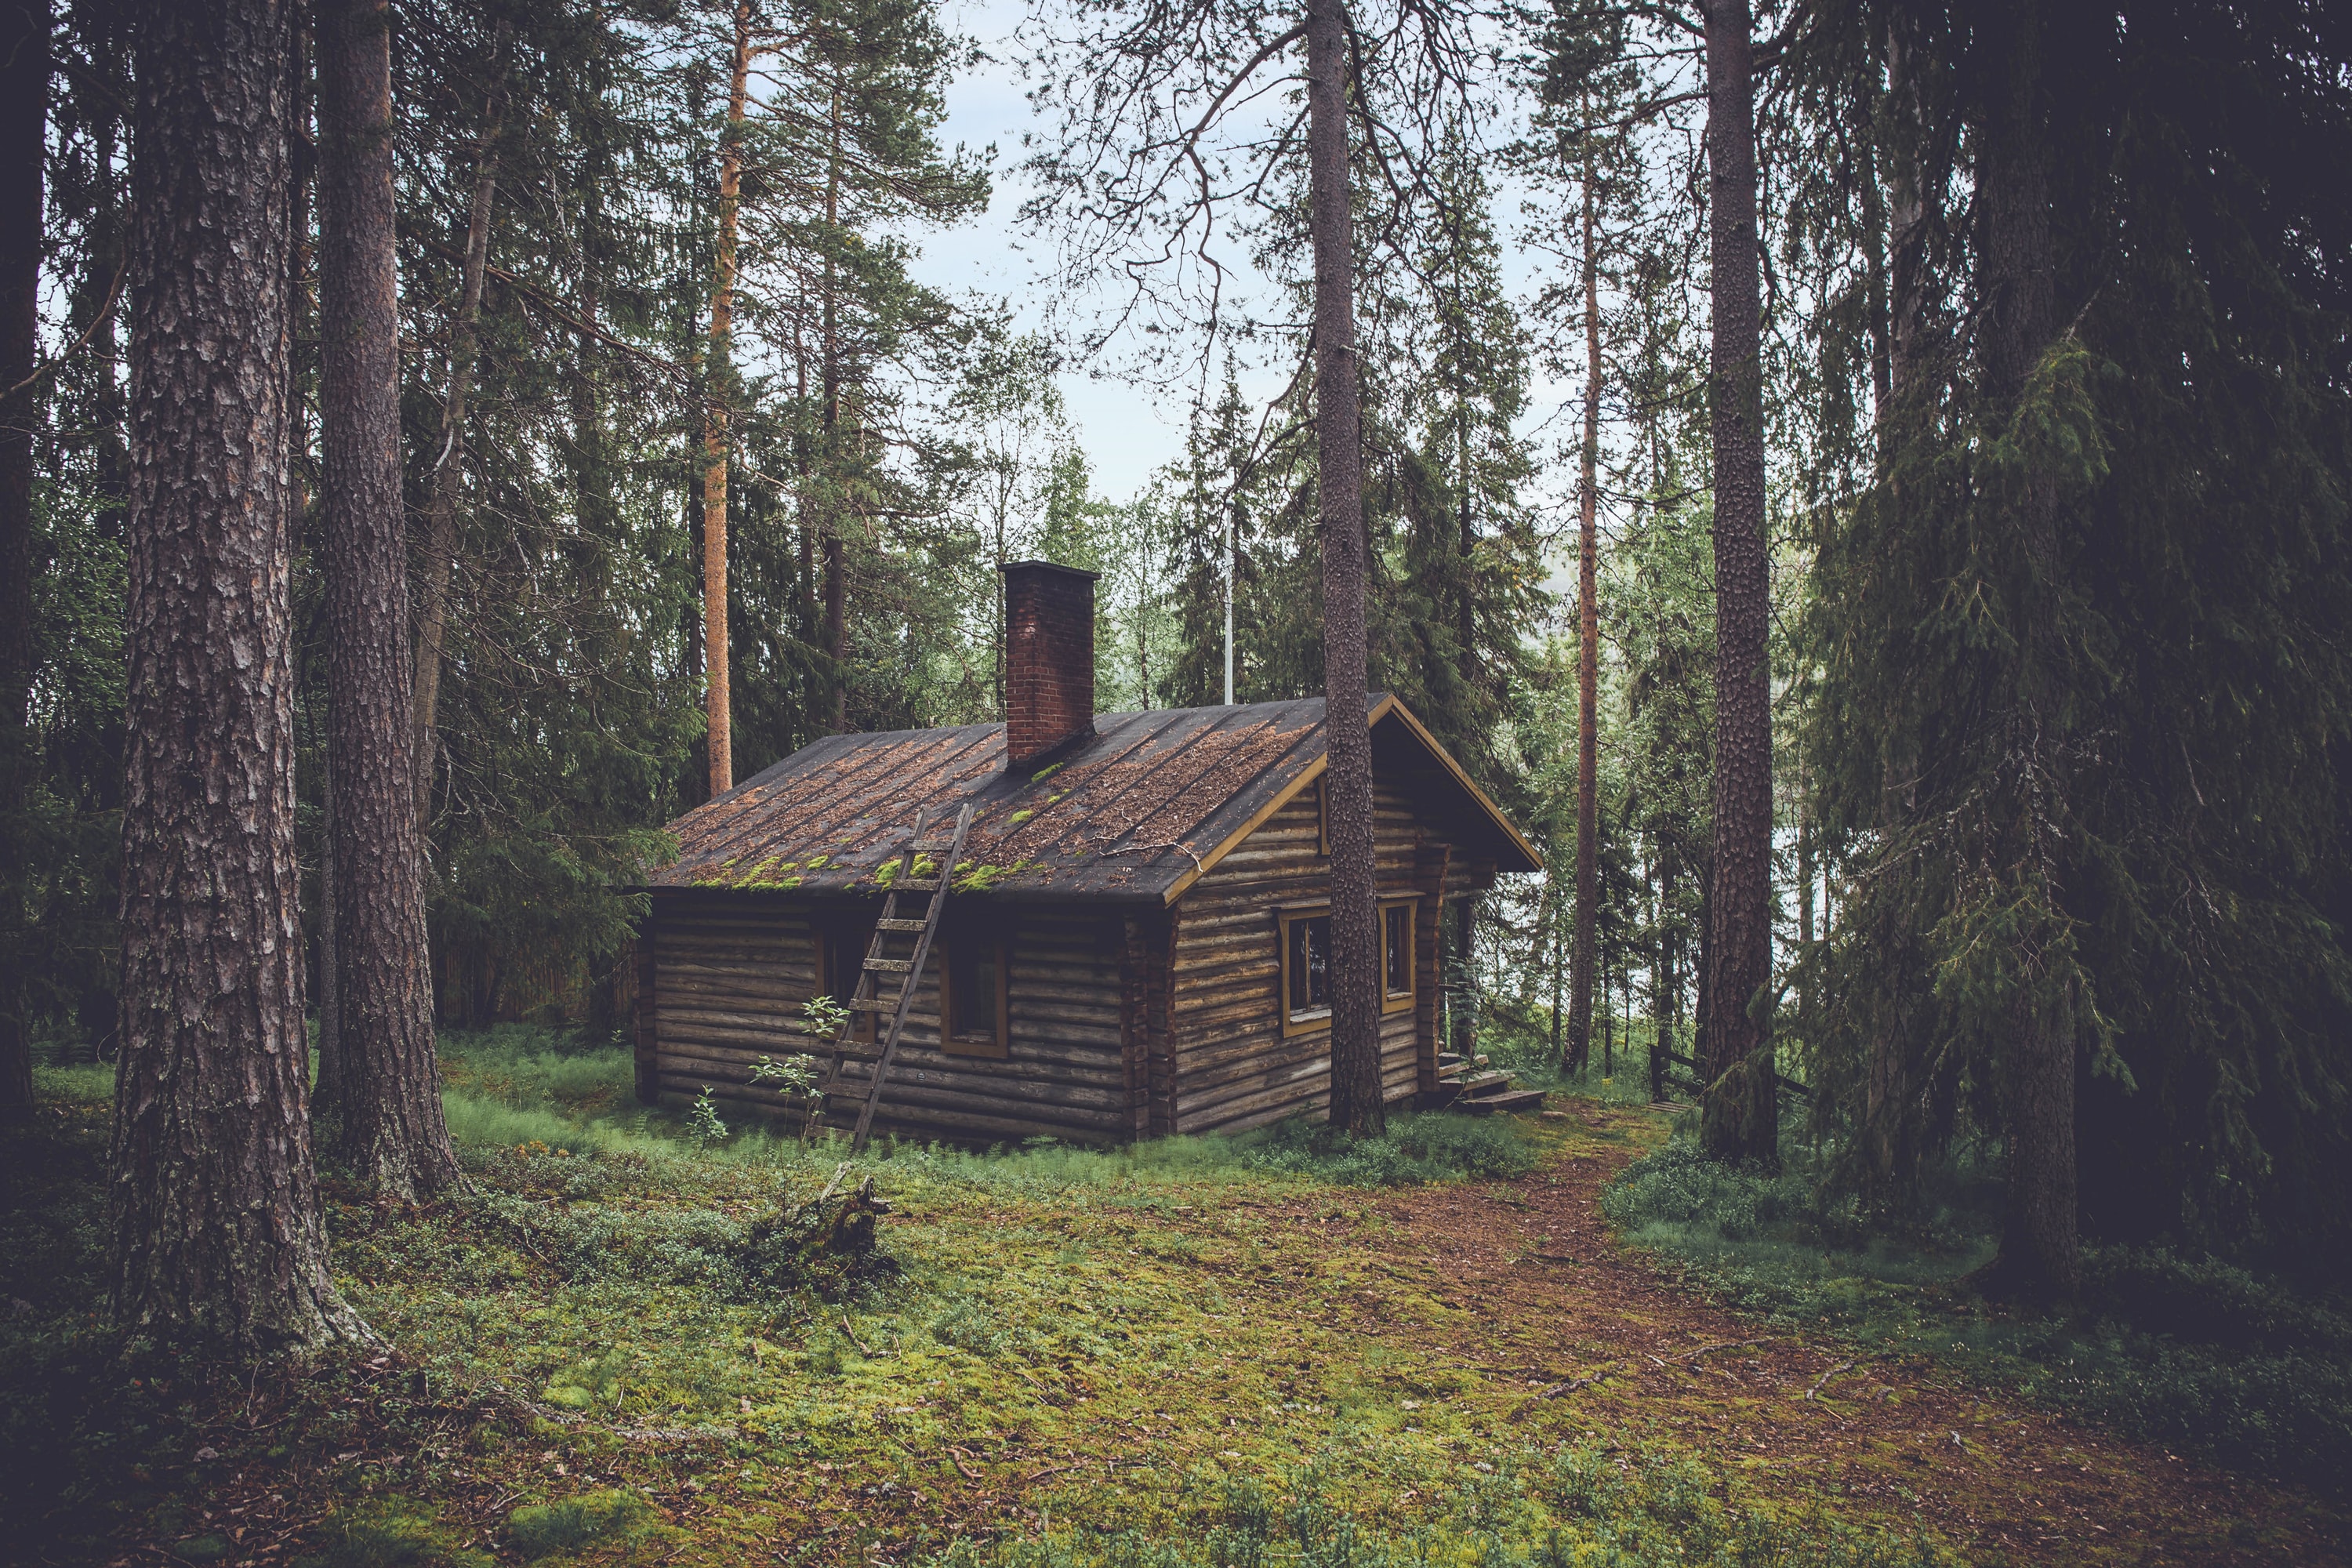 Log cabin in a forest